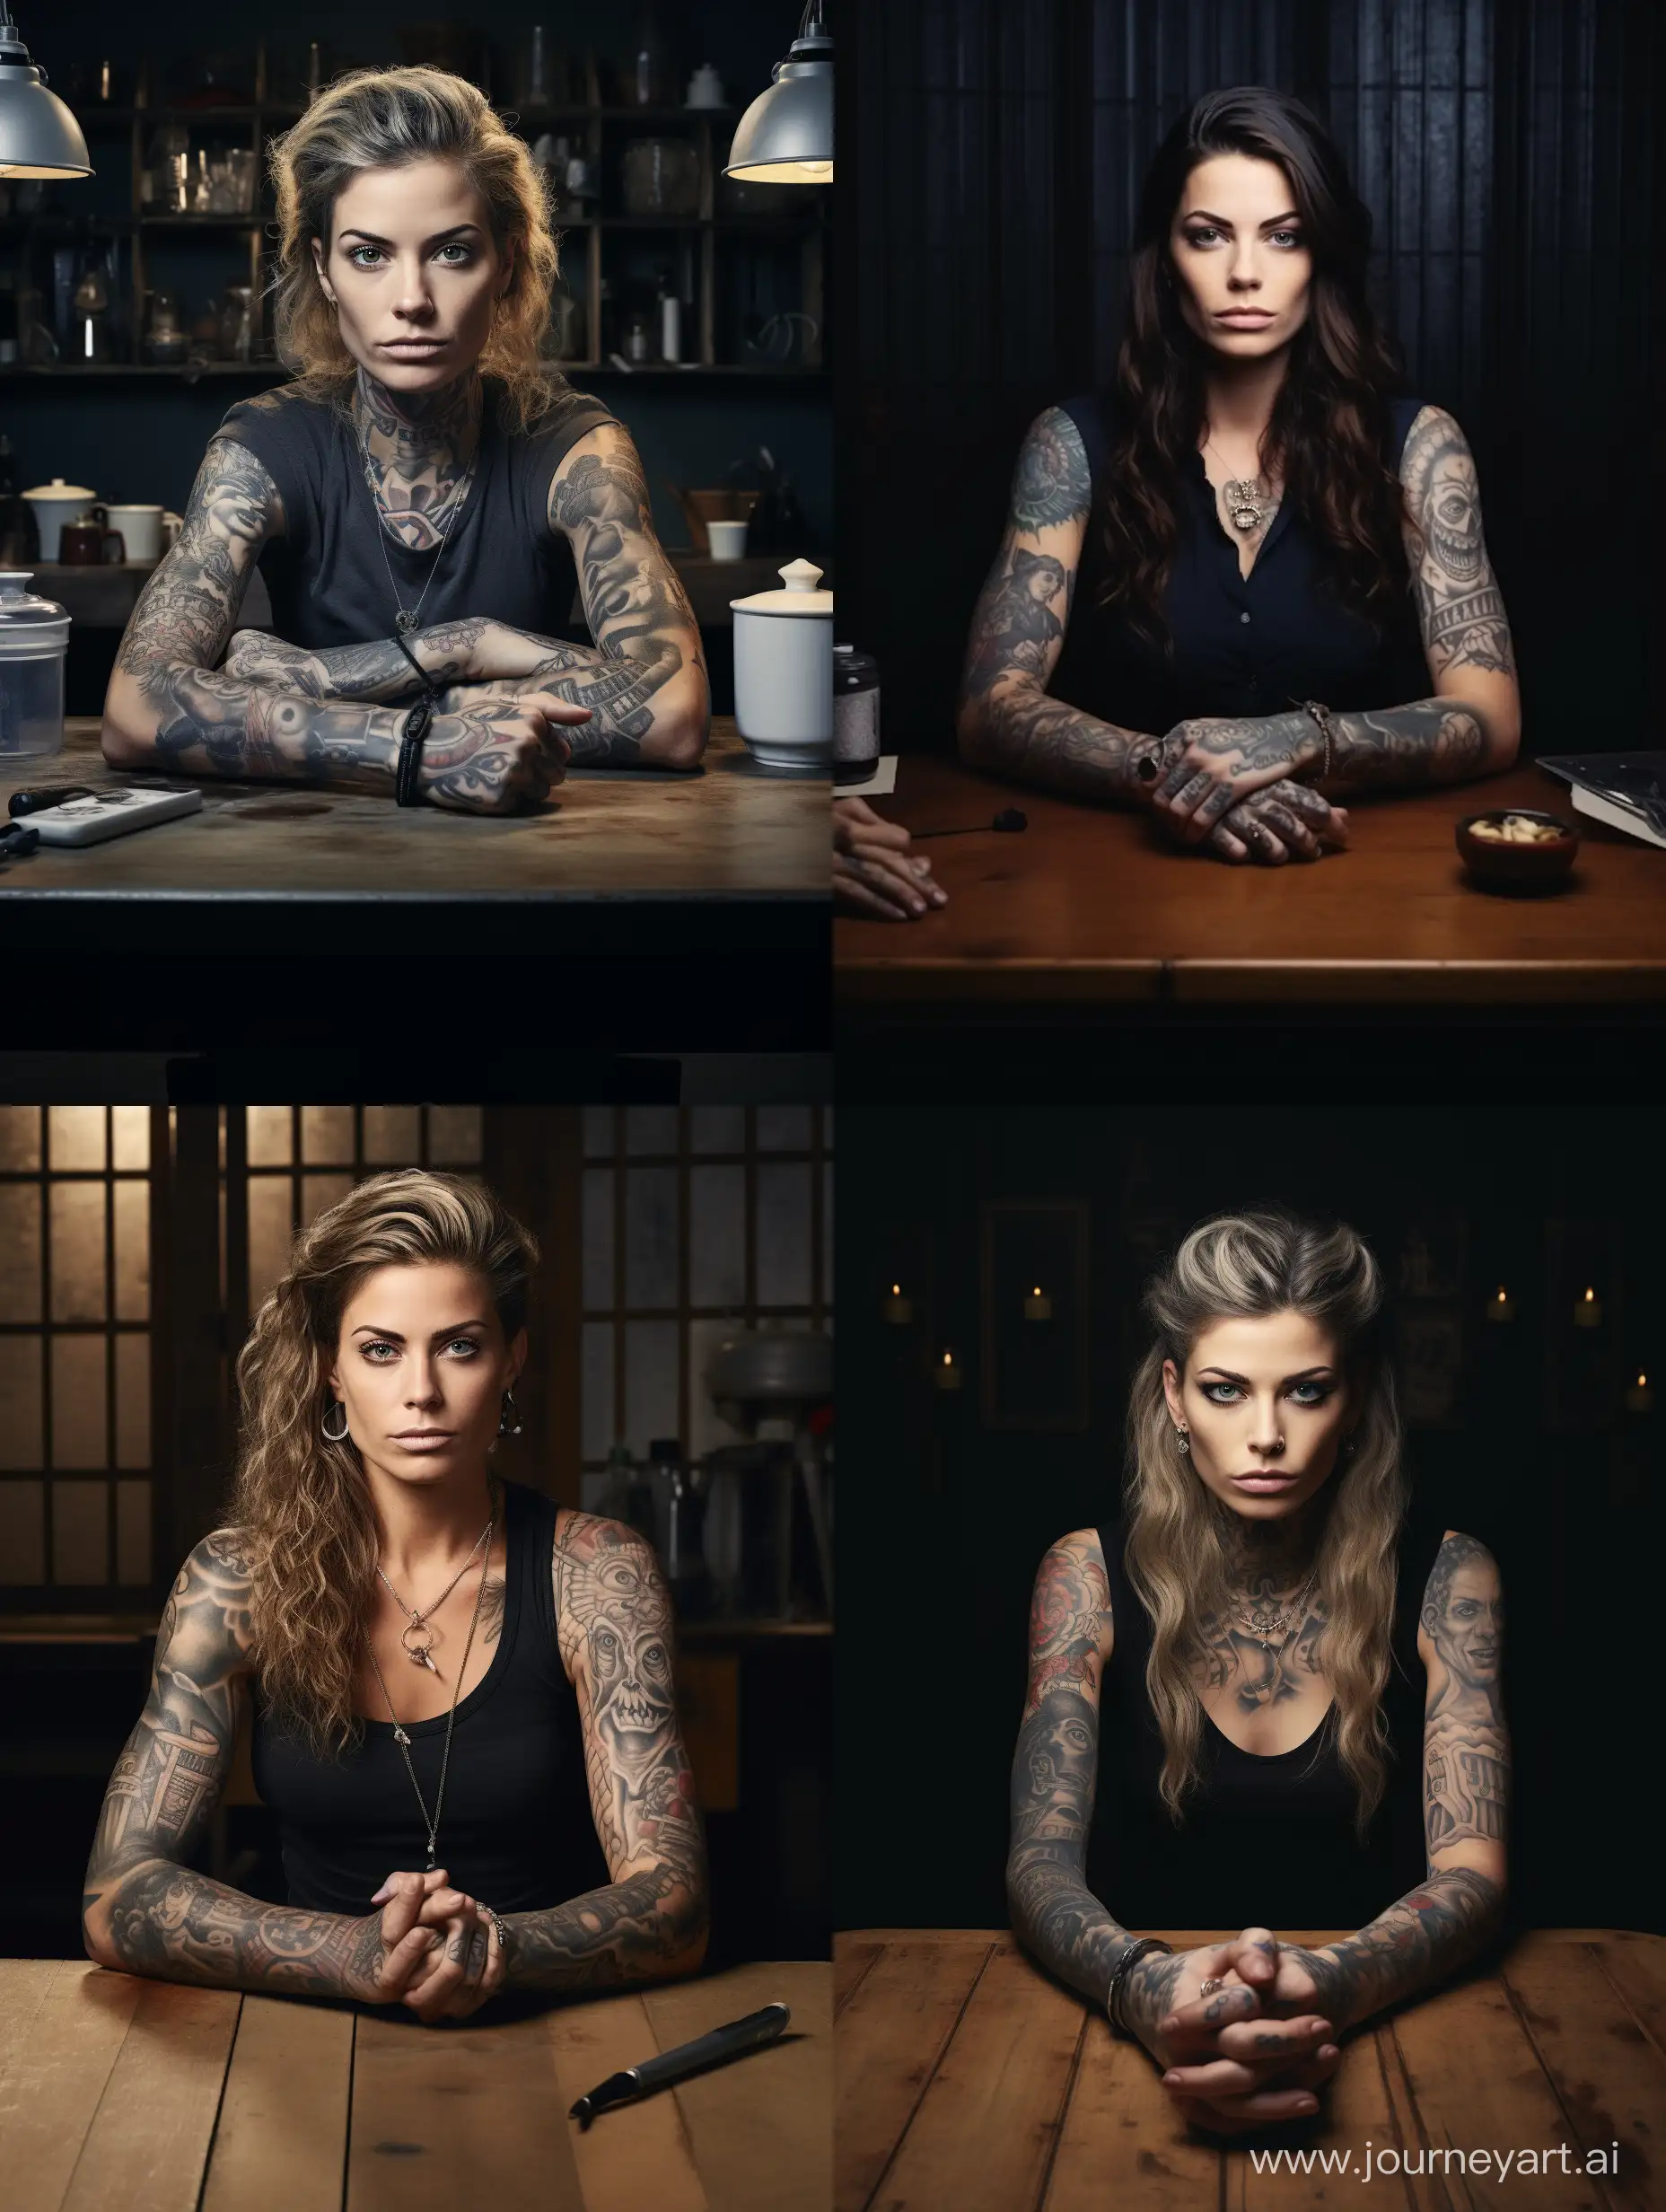 Reformed-Woman-with-Tattoos-Candid-Portrait-in-4K-High-Detail